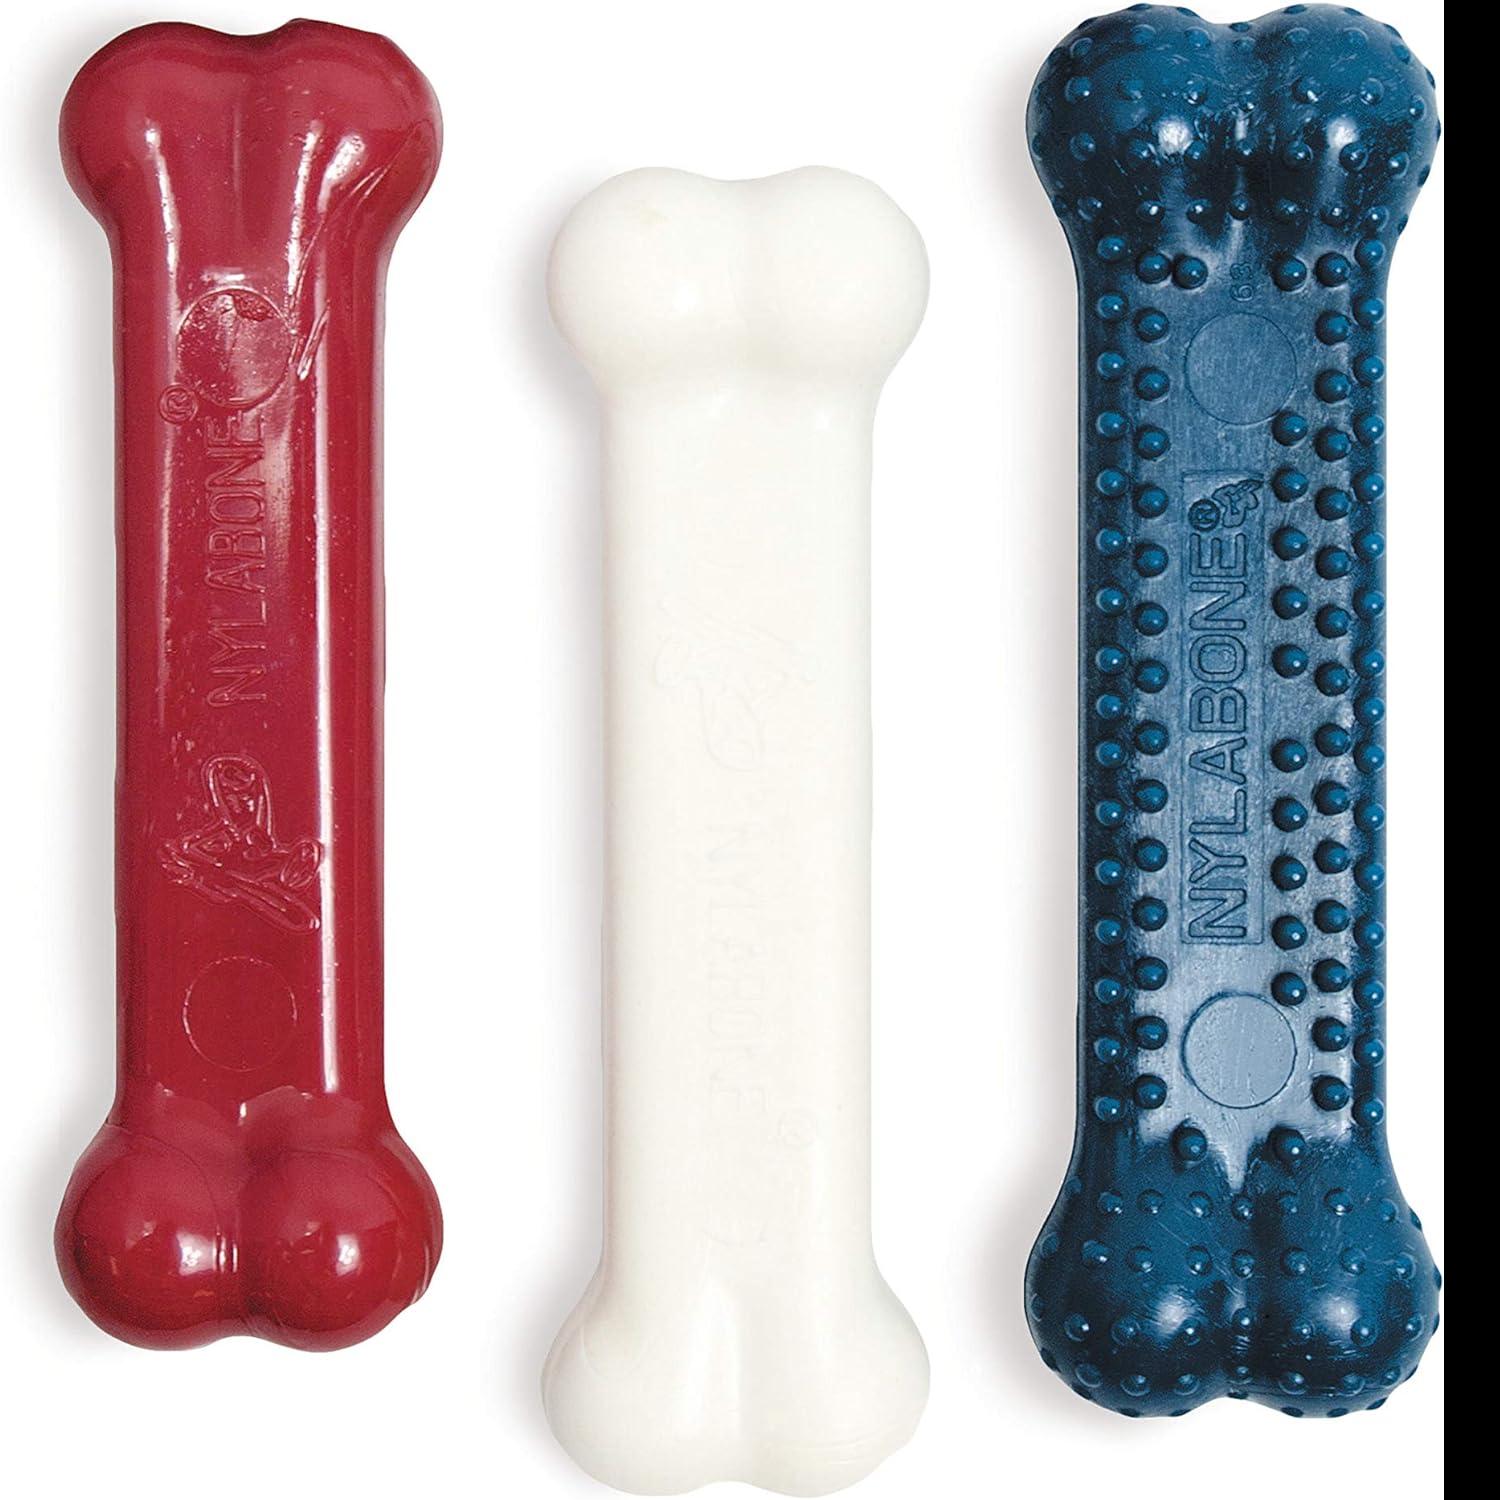 Nylabone Power Chew Toys Variety Triple Pack 3 Pack for $3.99 Shipped